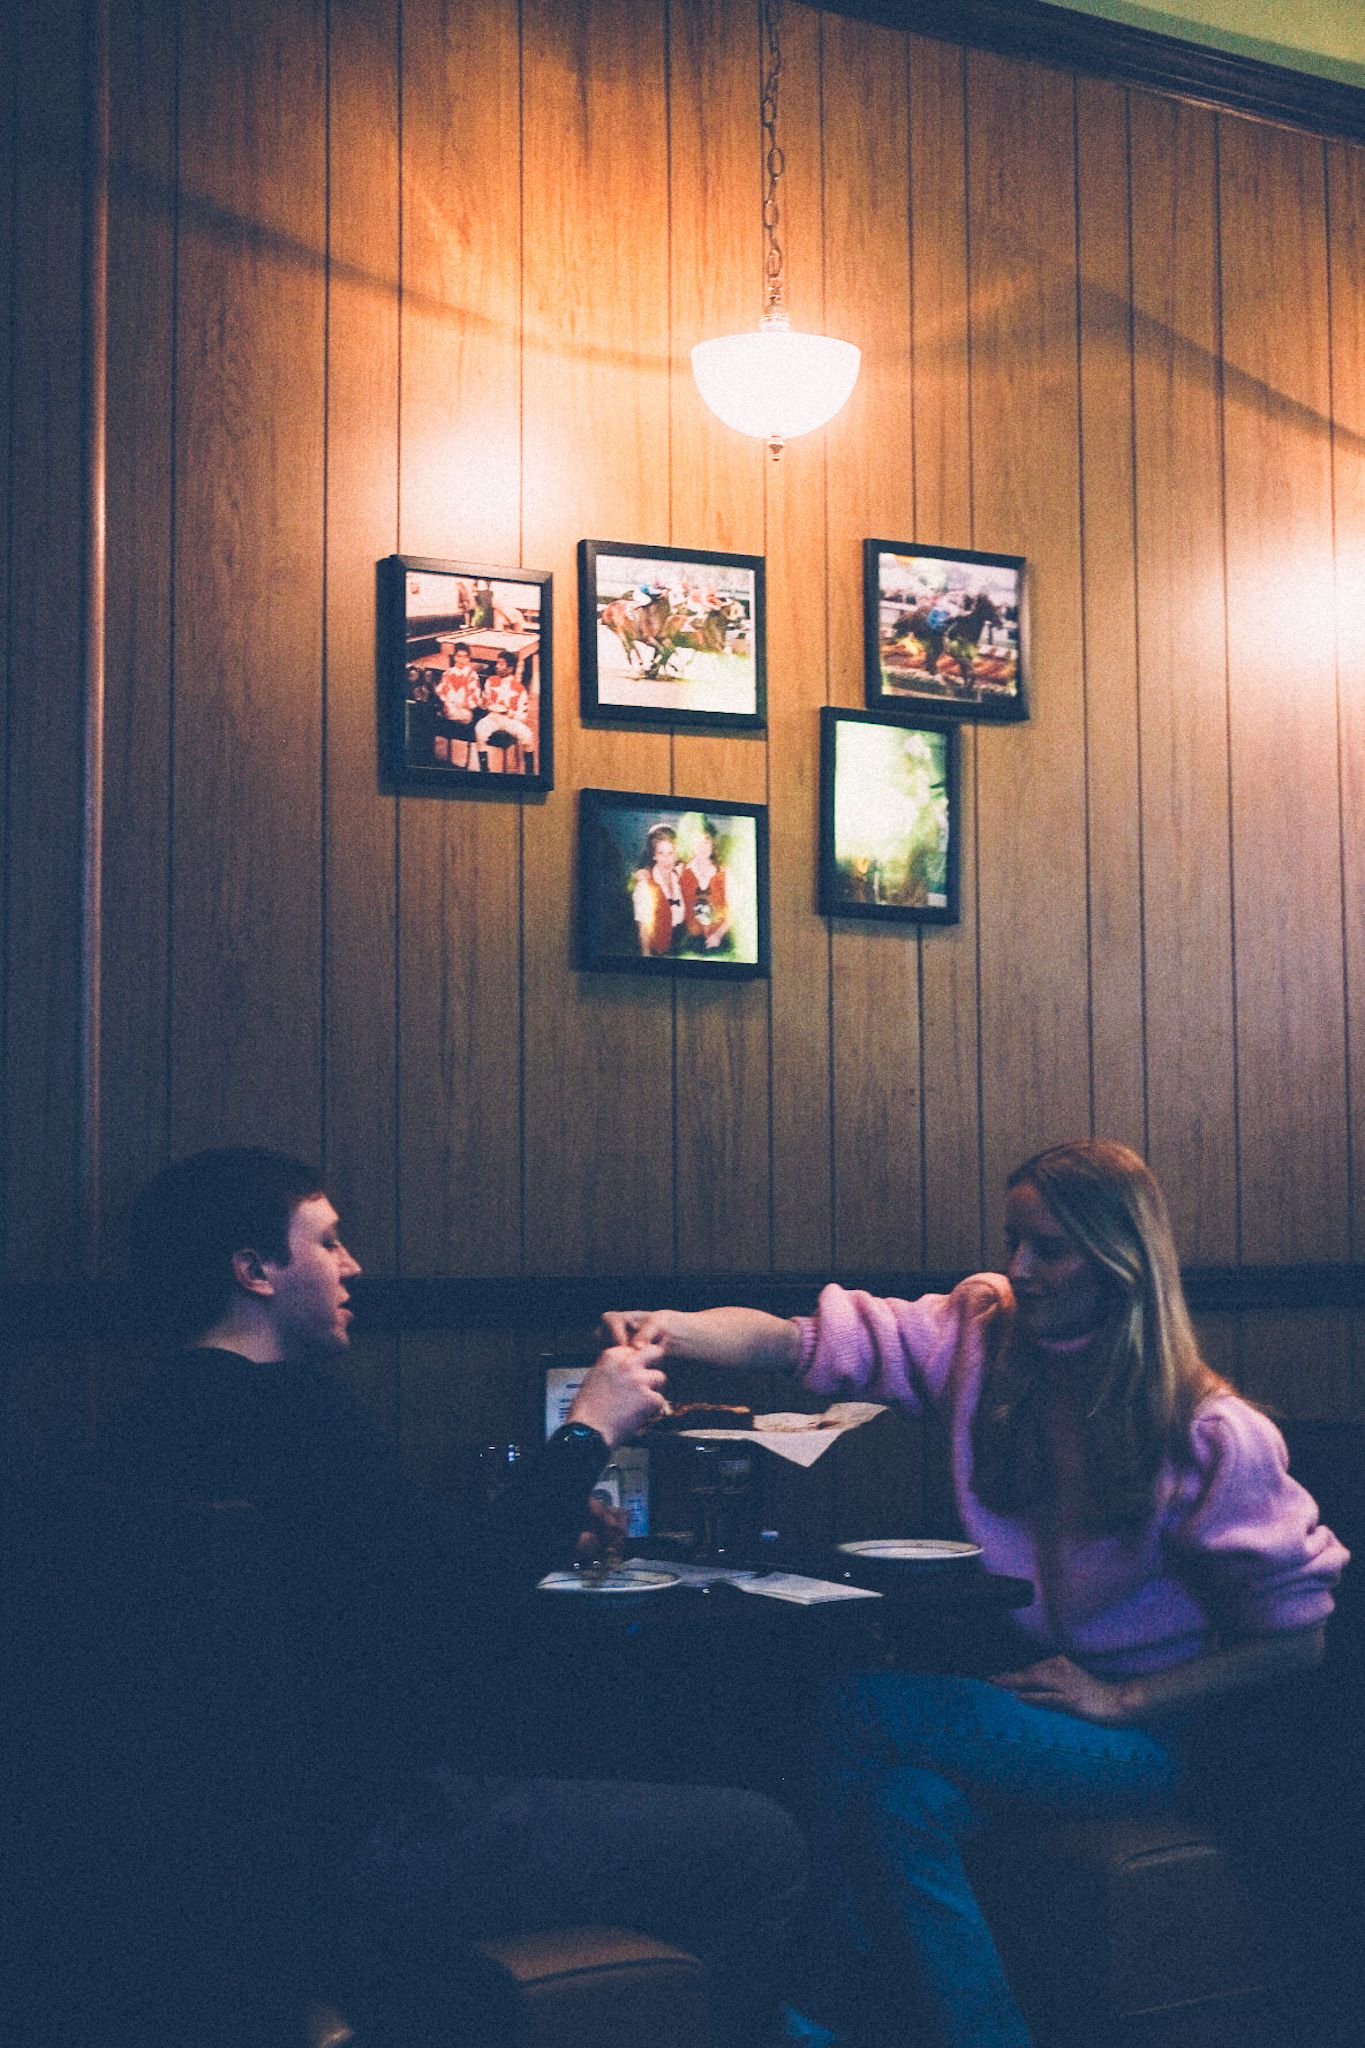 A young couple sits across from each other in a small booth, sharing a pizza. One of them, a woman in a pink sweater, reaches for a slice. Above them hangs a pendant light that illuminates five photo frames on the wood paneled wall above them.